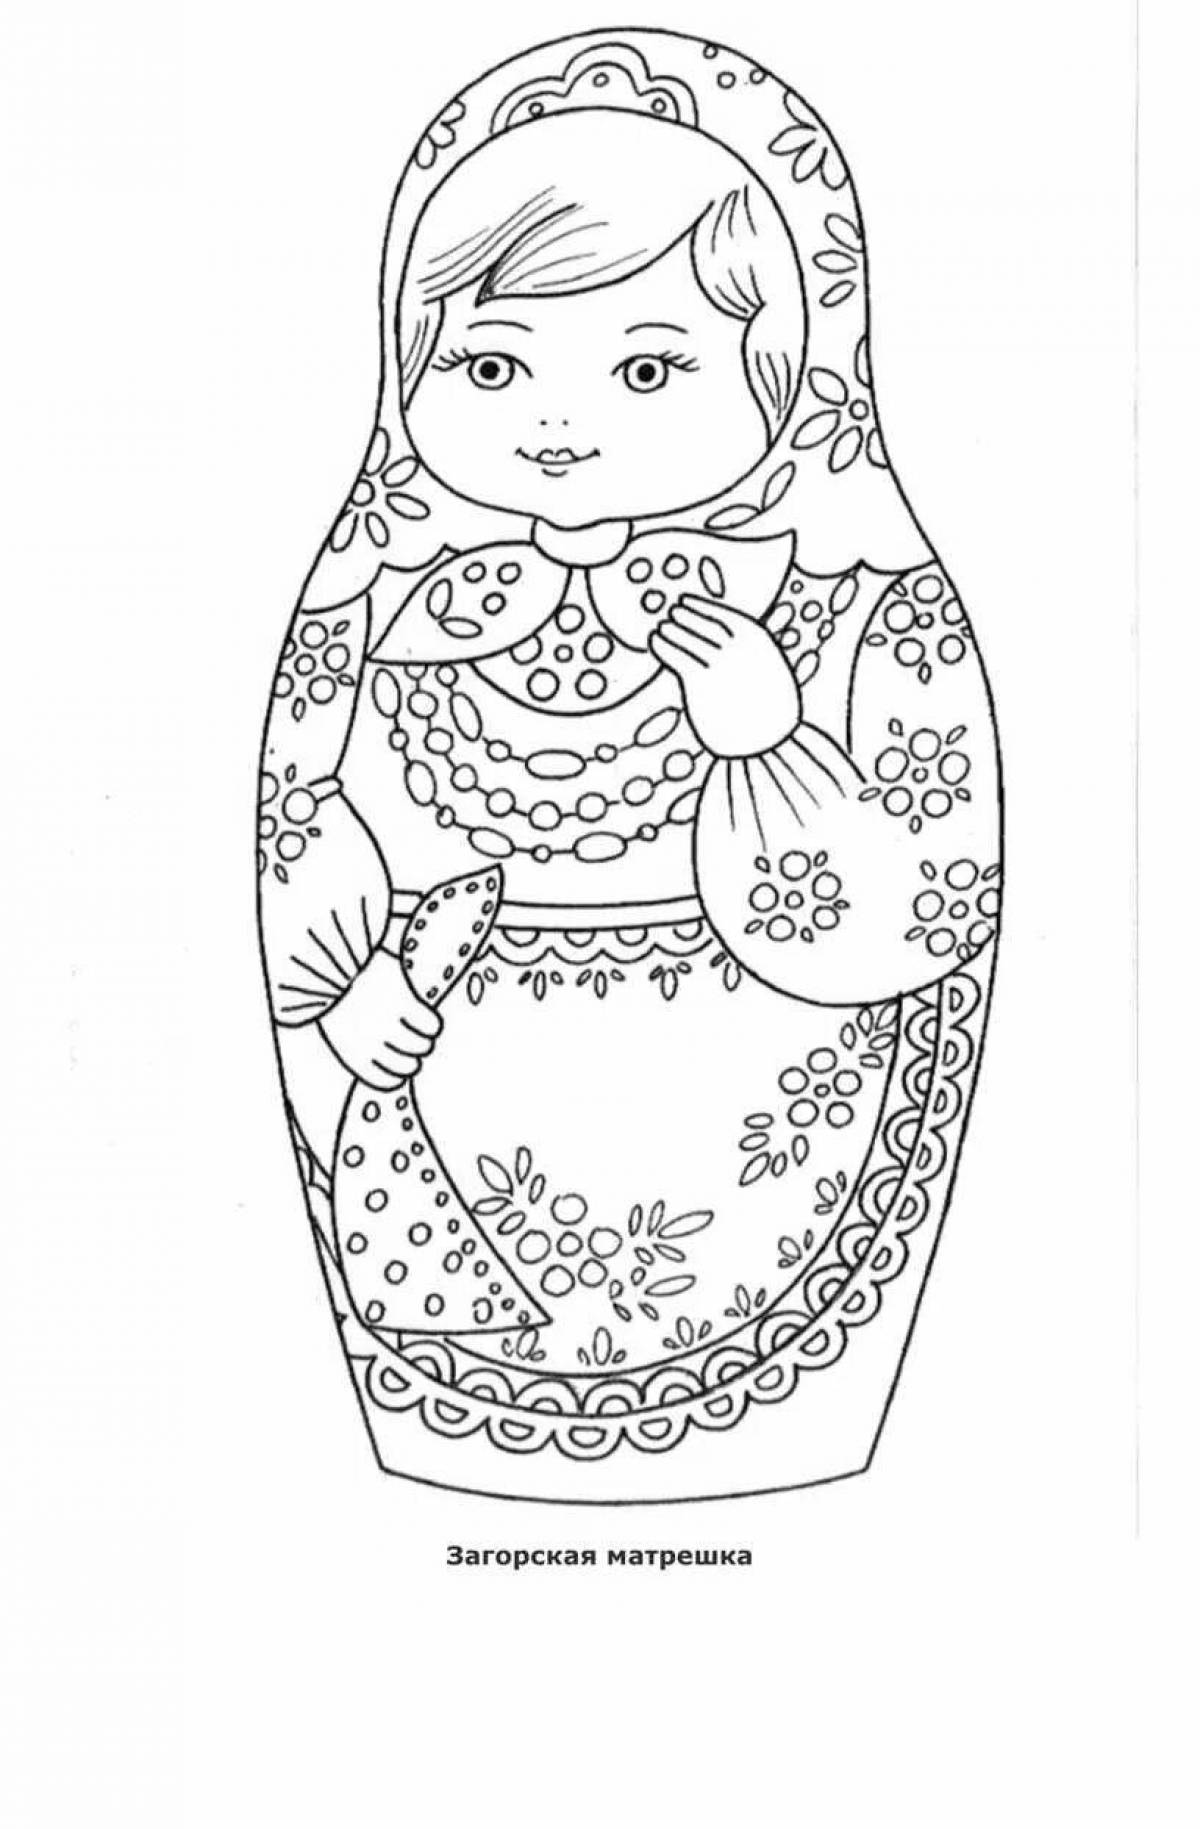 Bright matryoshka coloring book for children 4-5 years old